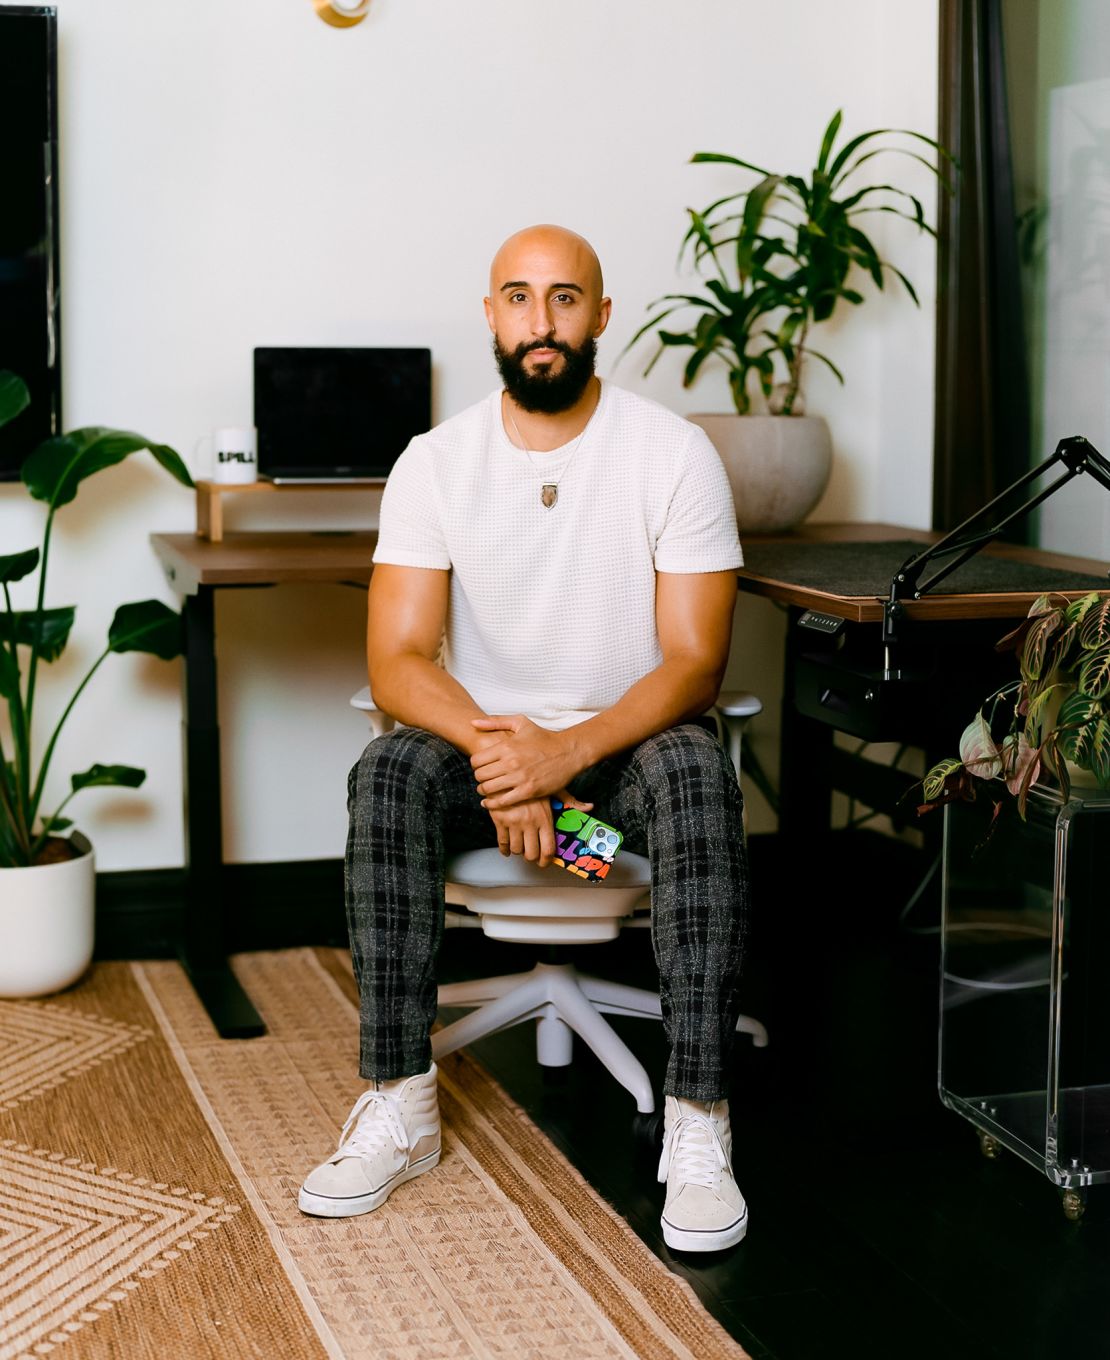 Alphonzo "Phonz" Terrell is the CEO and co-founder of Spill, which he hopes will be a safer, more inclusive social platform for a diverse community of users.